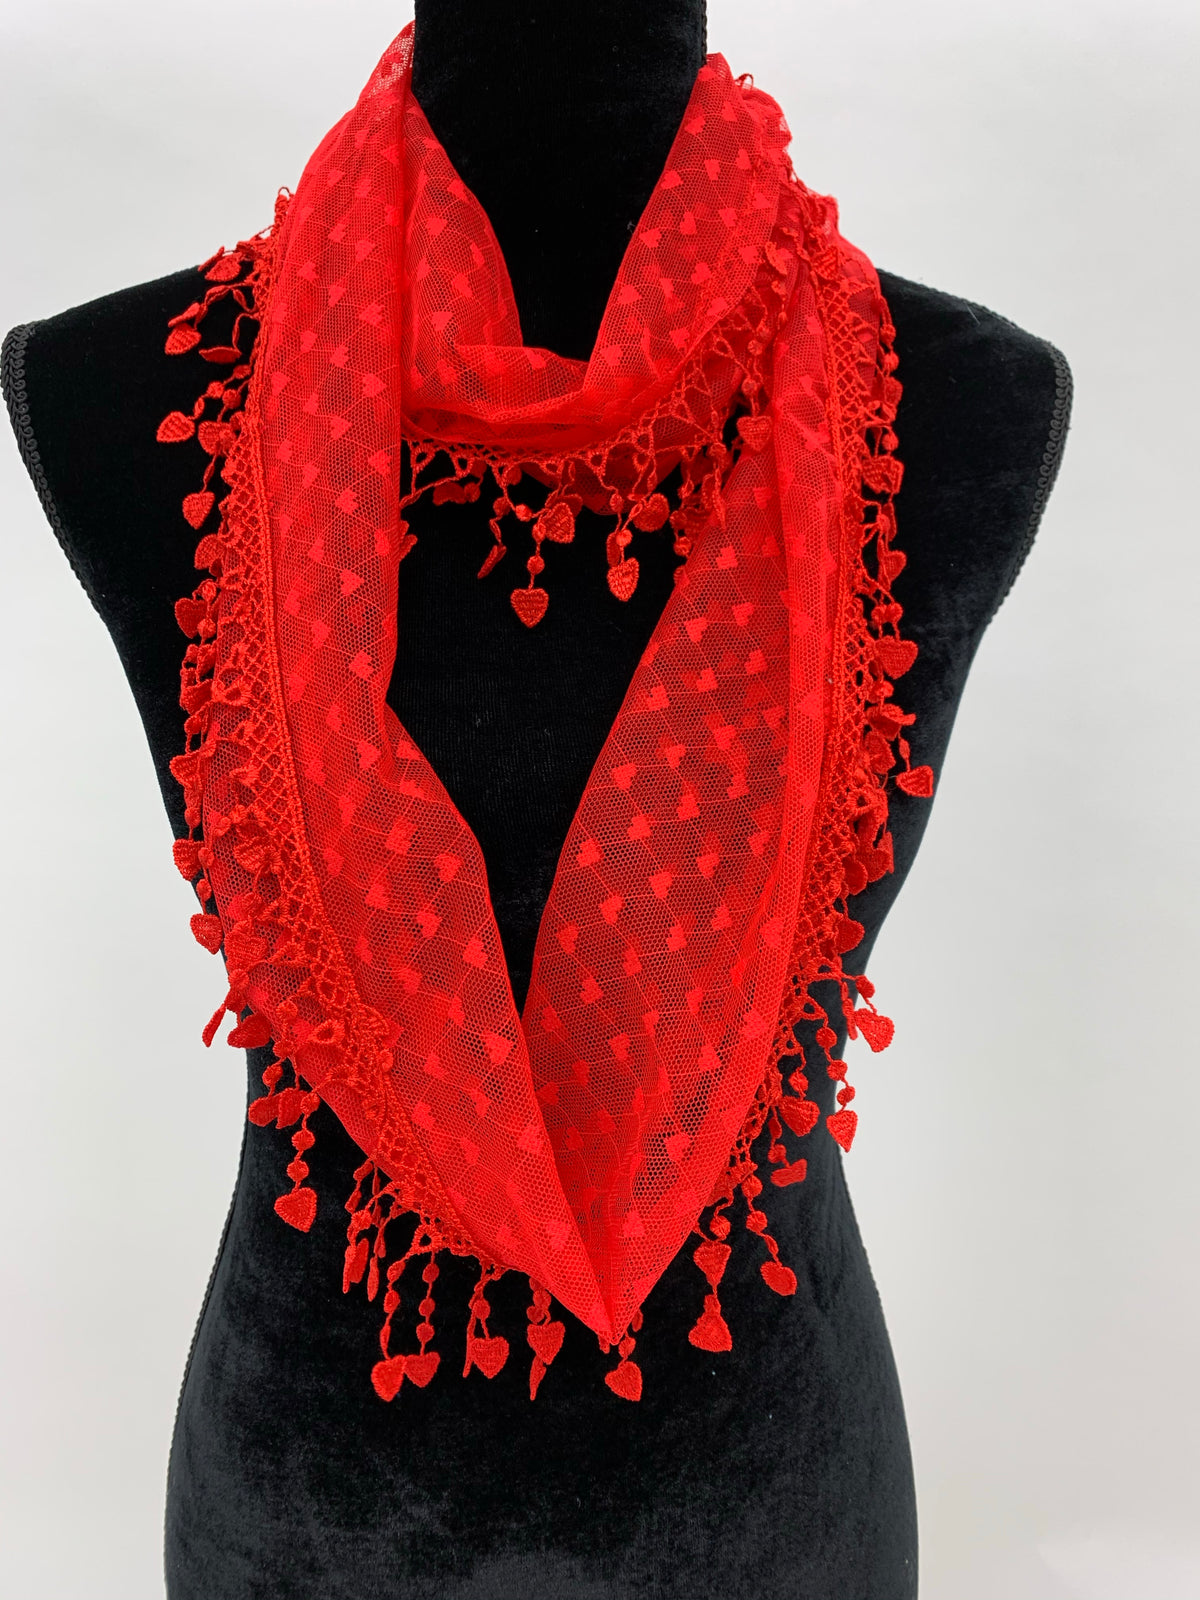 Lace Heart Infinity Scarf